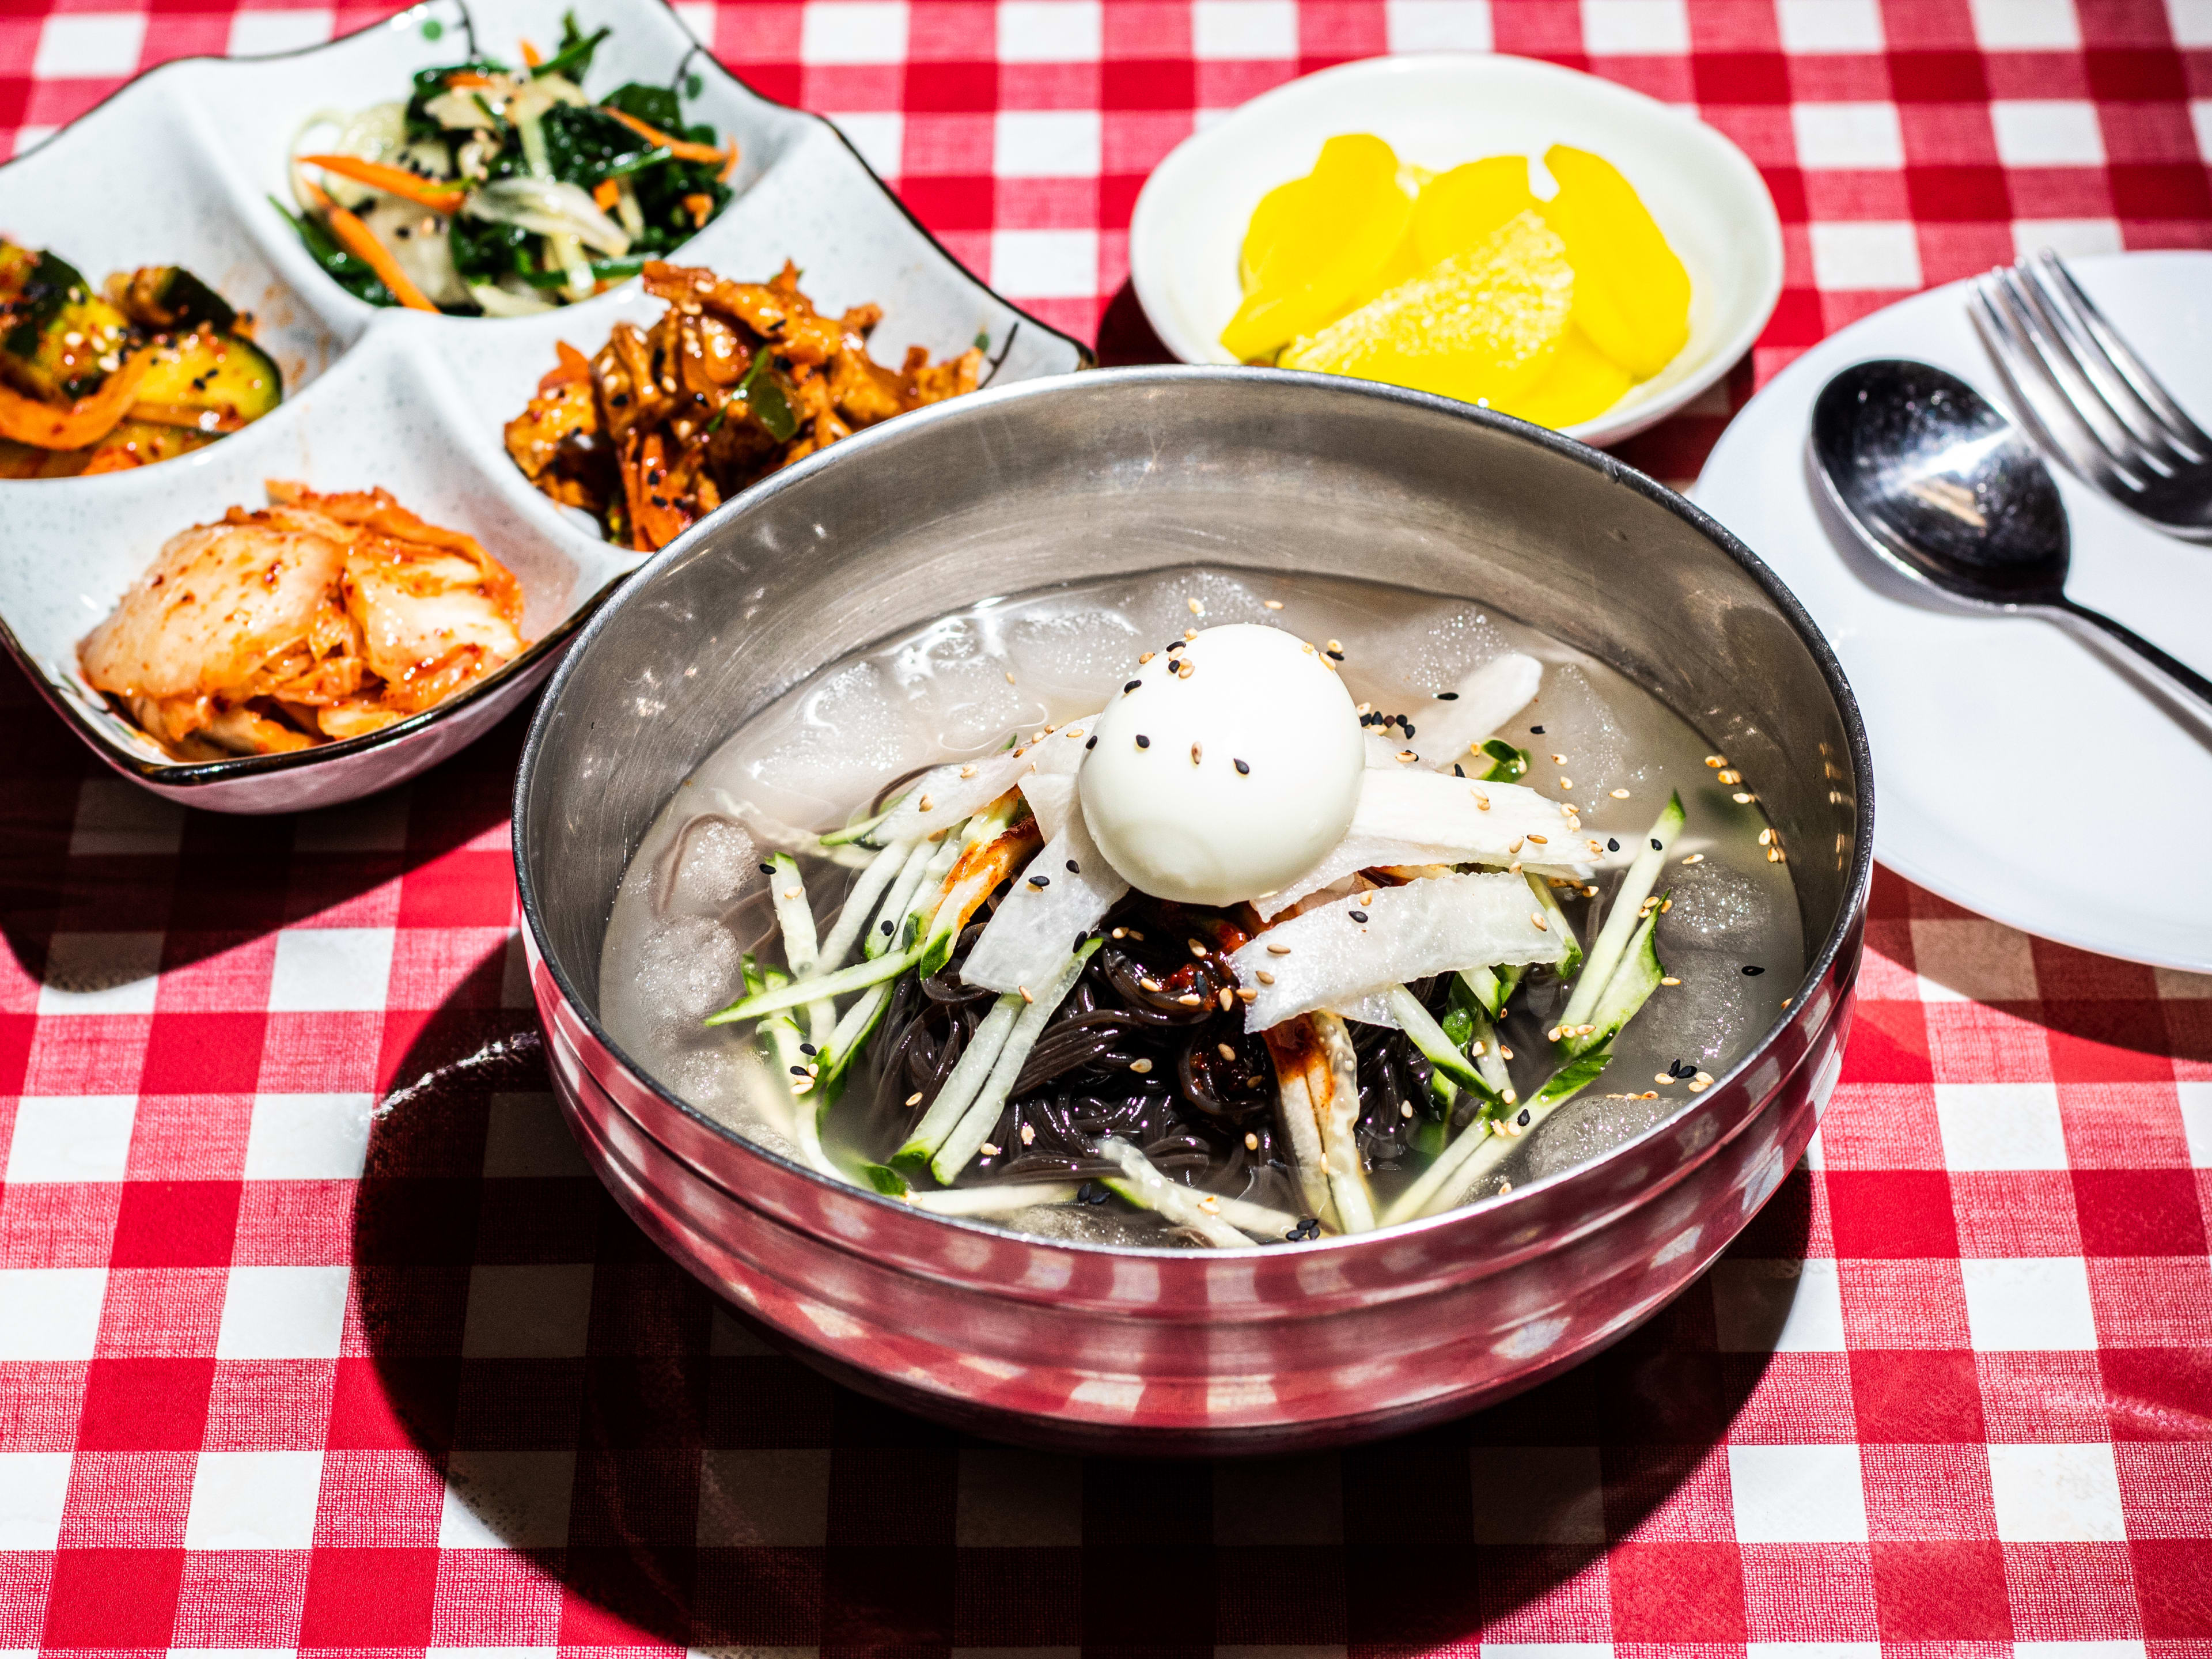 Spread of dishes including kimchi/banchan, cold noodle dish in tin bowl with whole egg, and cutlery.